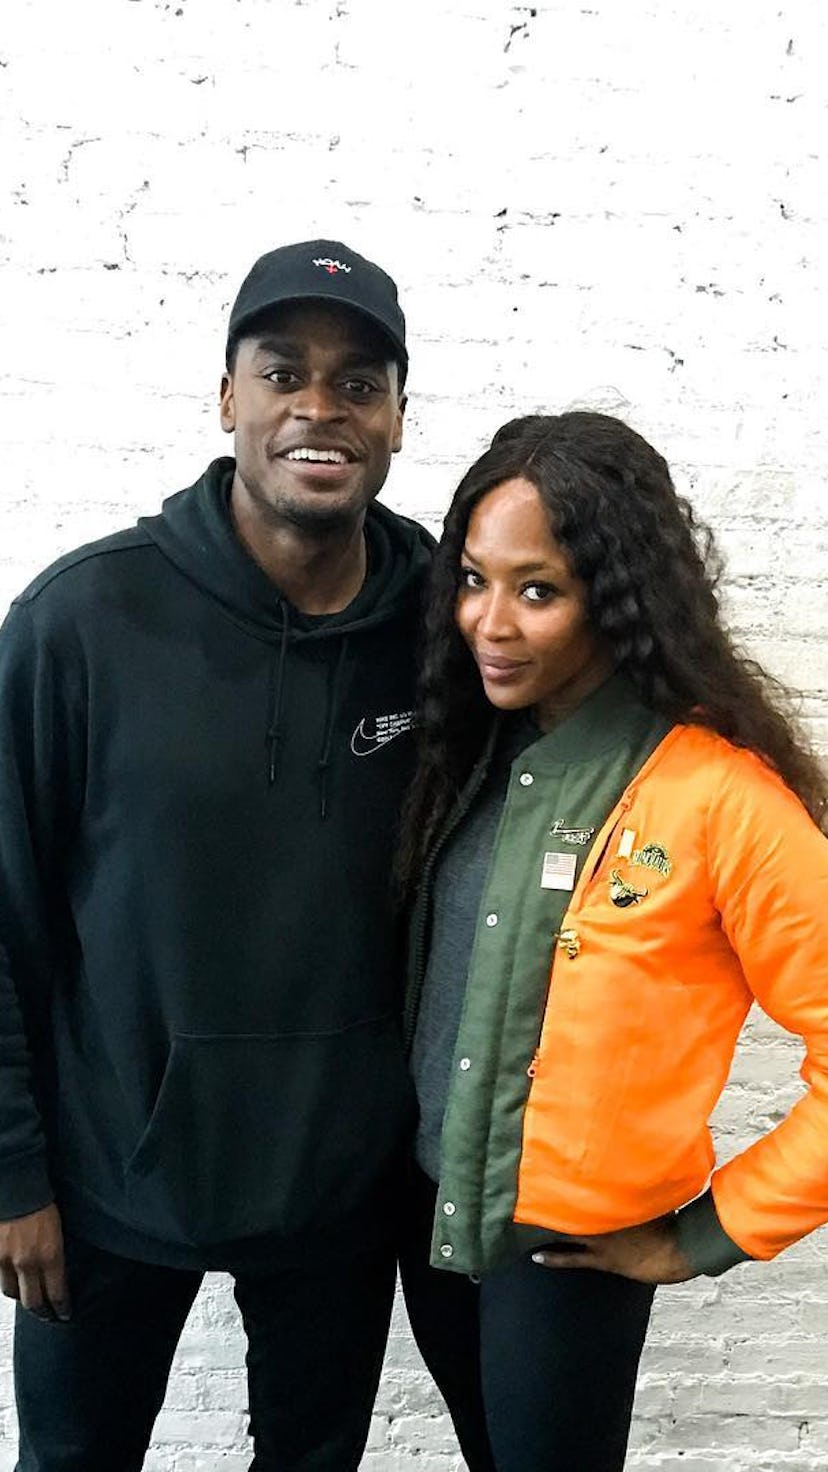 Naomi Campbell and her fitness trainer posing for a photo together